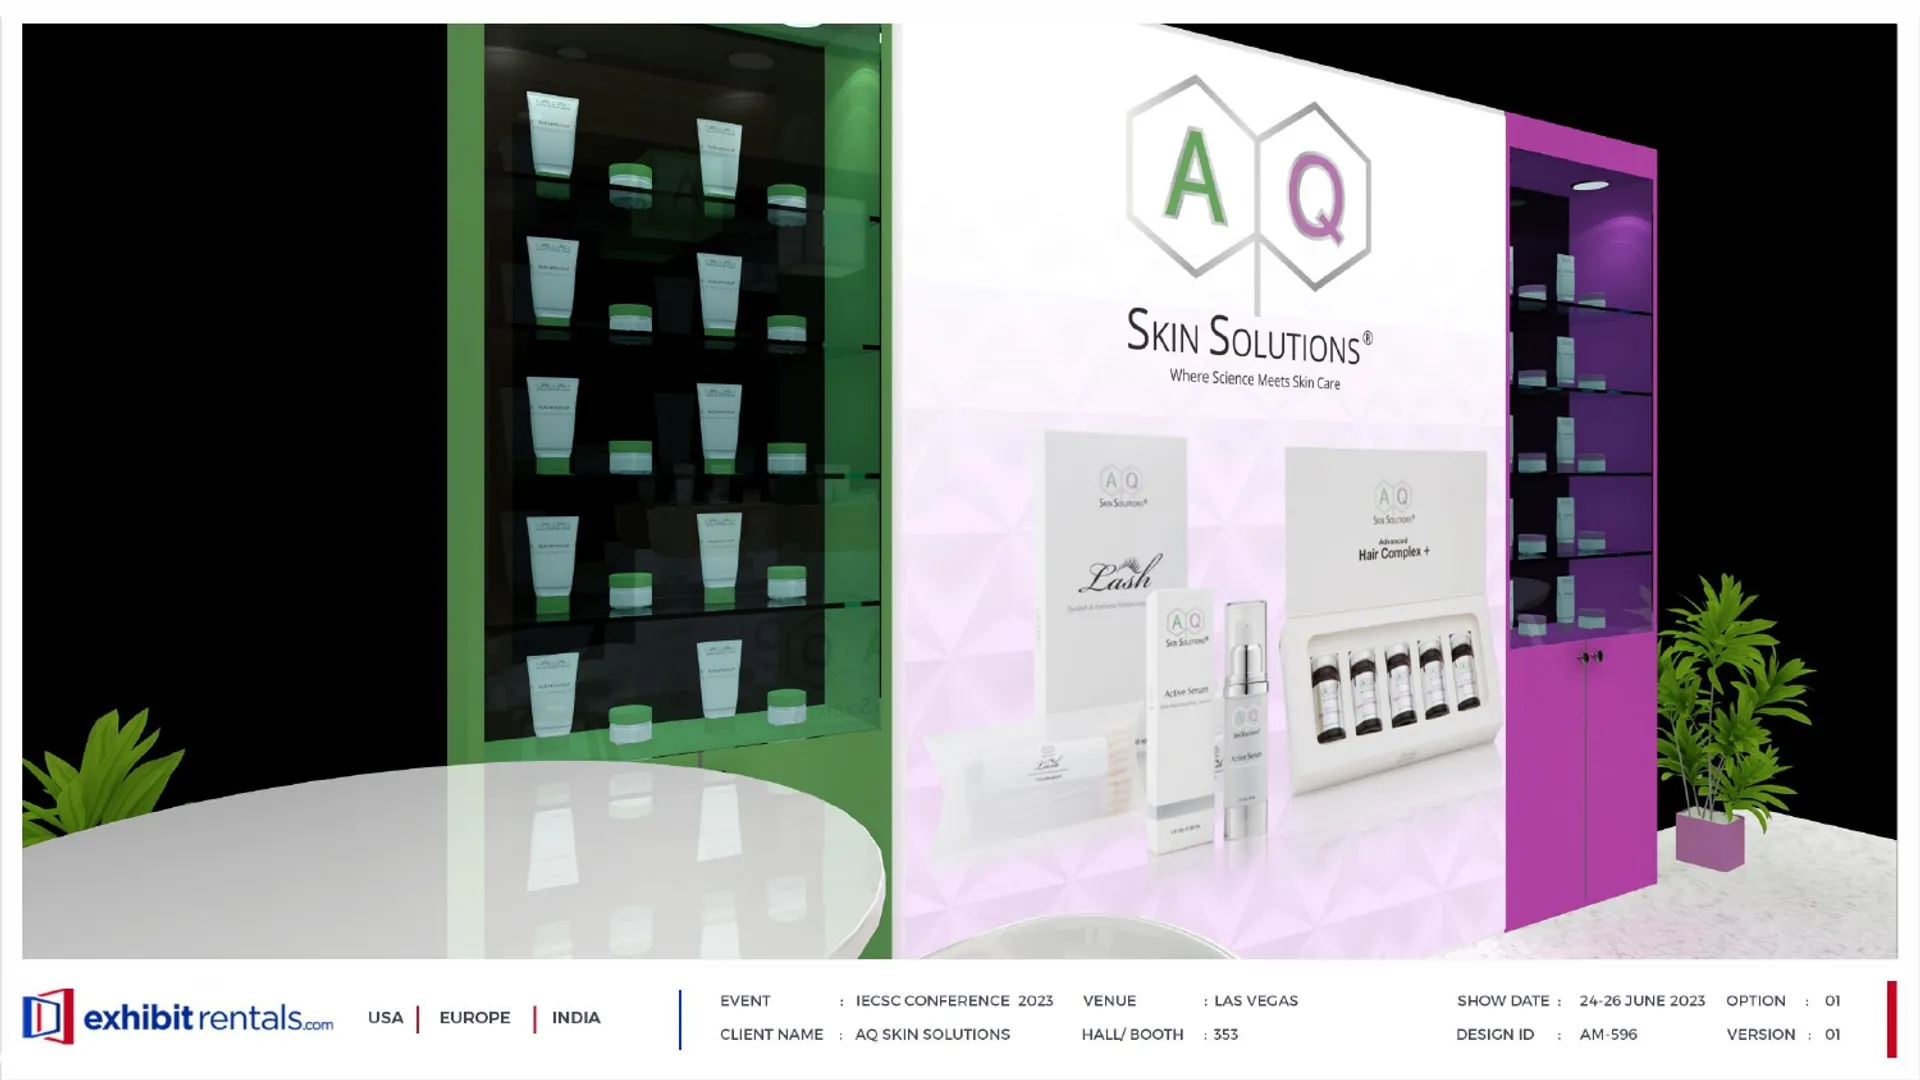 booth-design-projects/Exhibit-Rentals/2024-04-18-20x20-ISLAND-Project-85/1.1_AQ Skin Solutions_IECSC Conference_ER design proposal -23_page-0001-4ztuob.jpg